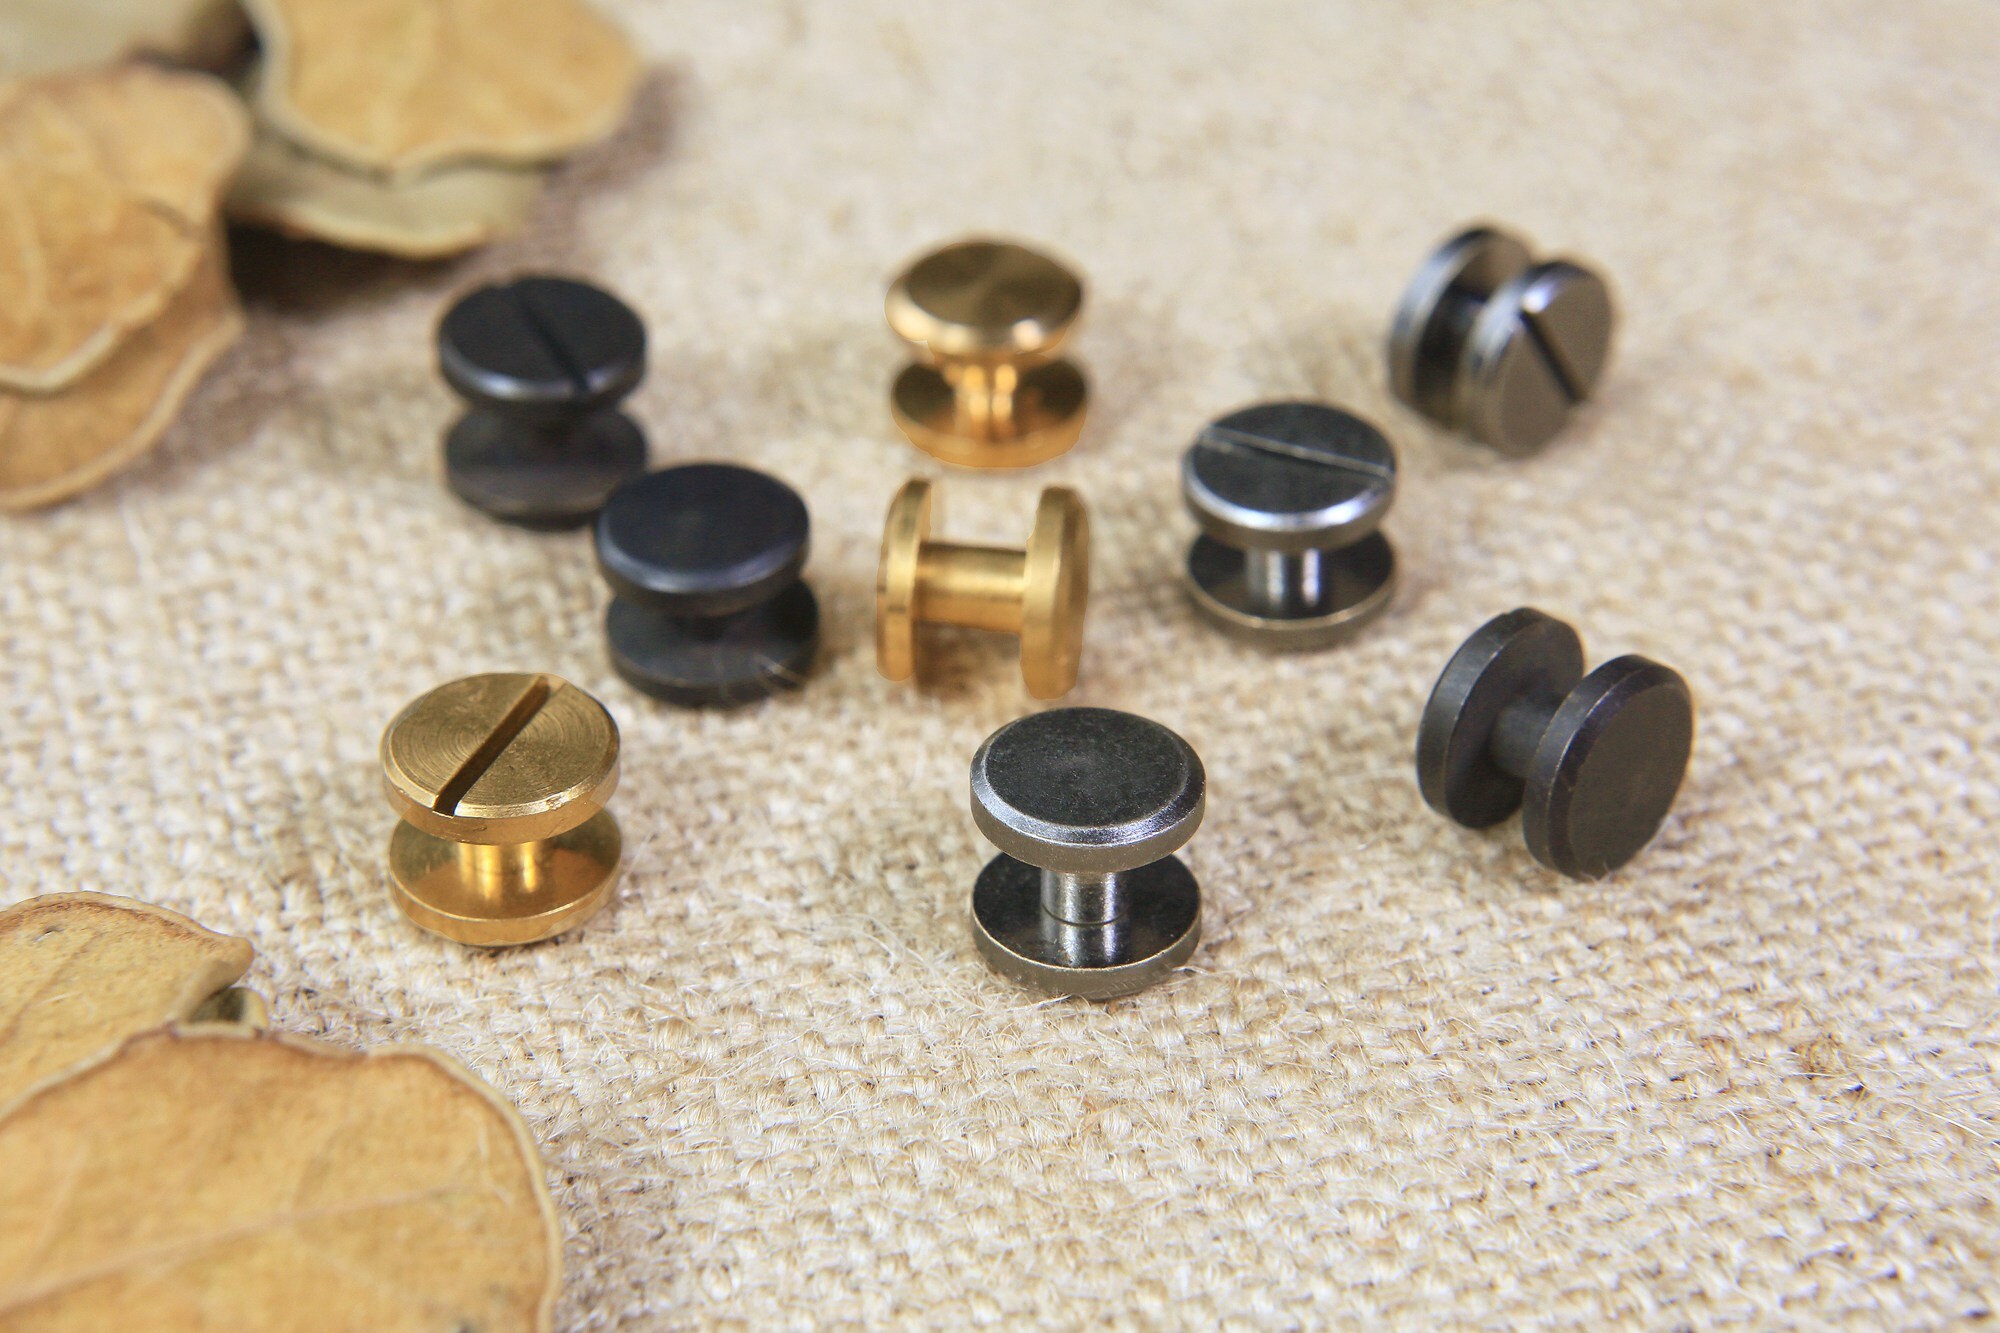 Copper Solid Rivets Metal Stud Fasteners Brass Tone Yinpecly 100PCS Round Flat Head Rivet 0.2 x 0.12 Length x Outer Diameter 